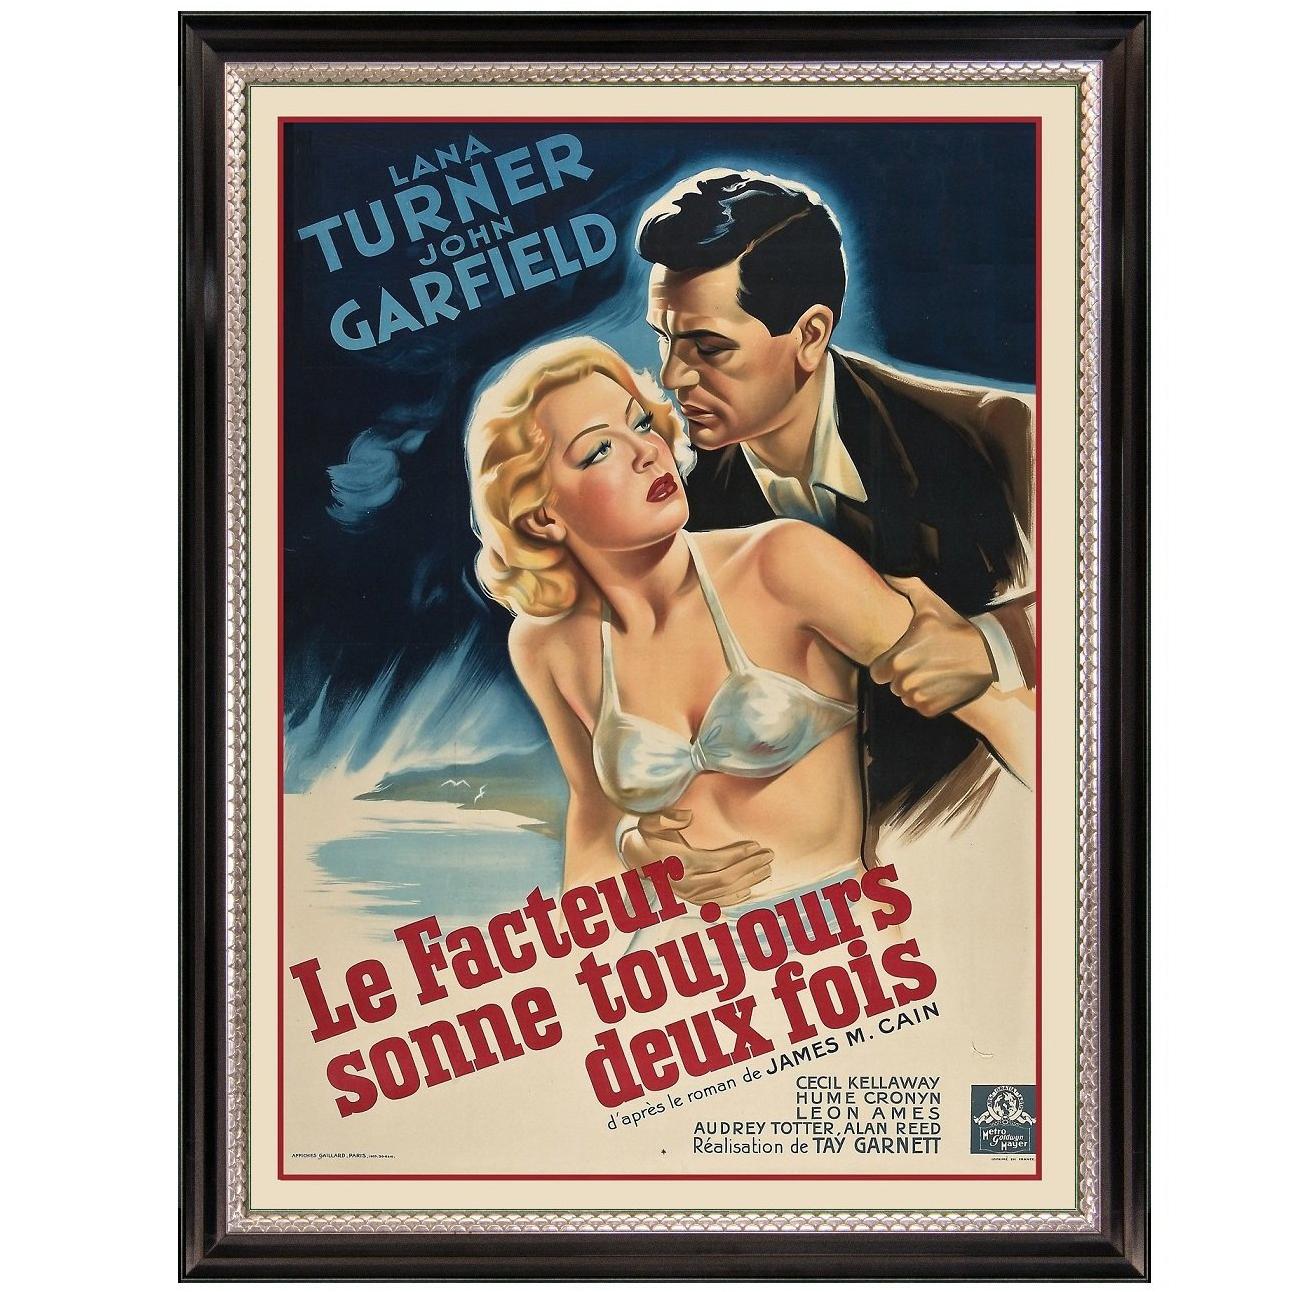 The Postman Always Rings Twice after Vintage Movie Poster, Hollywood Regency Era For Sale